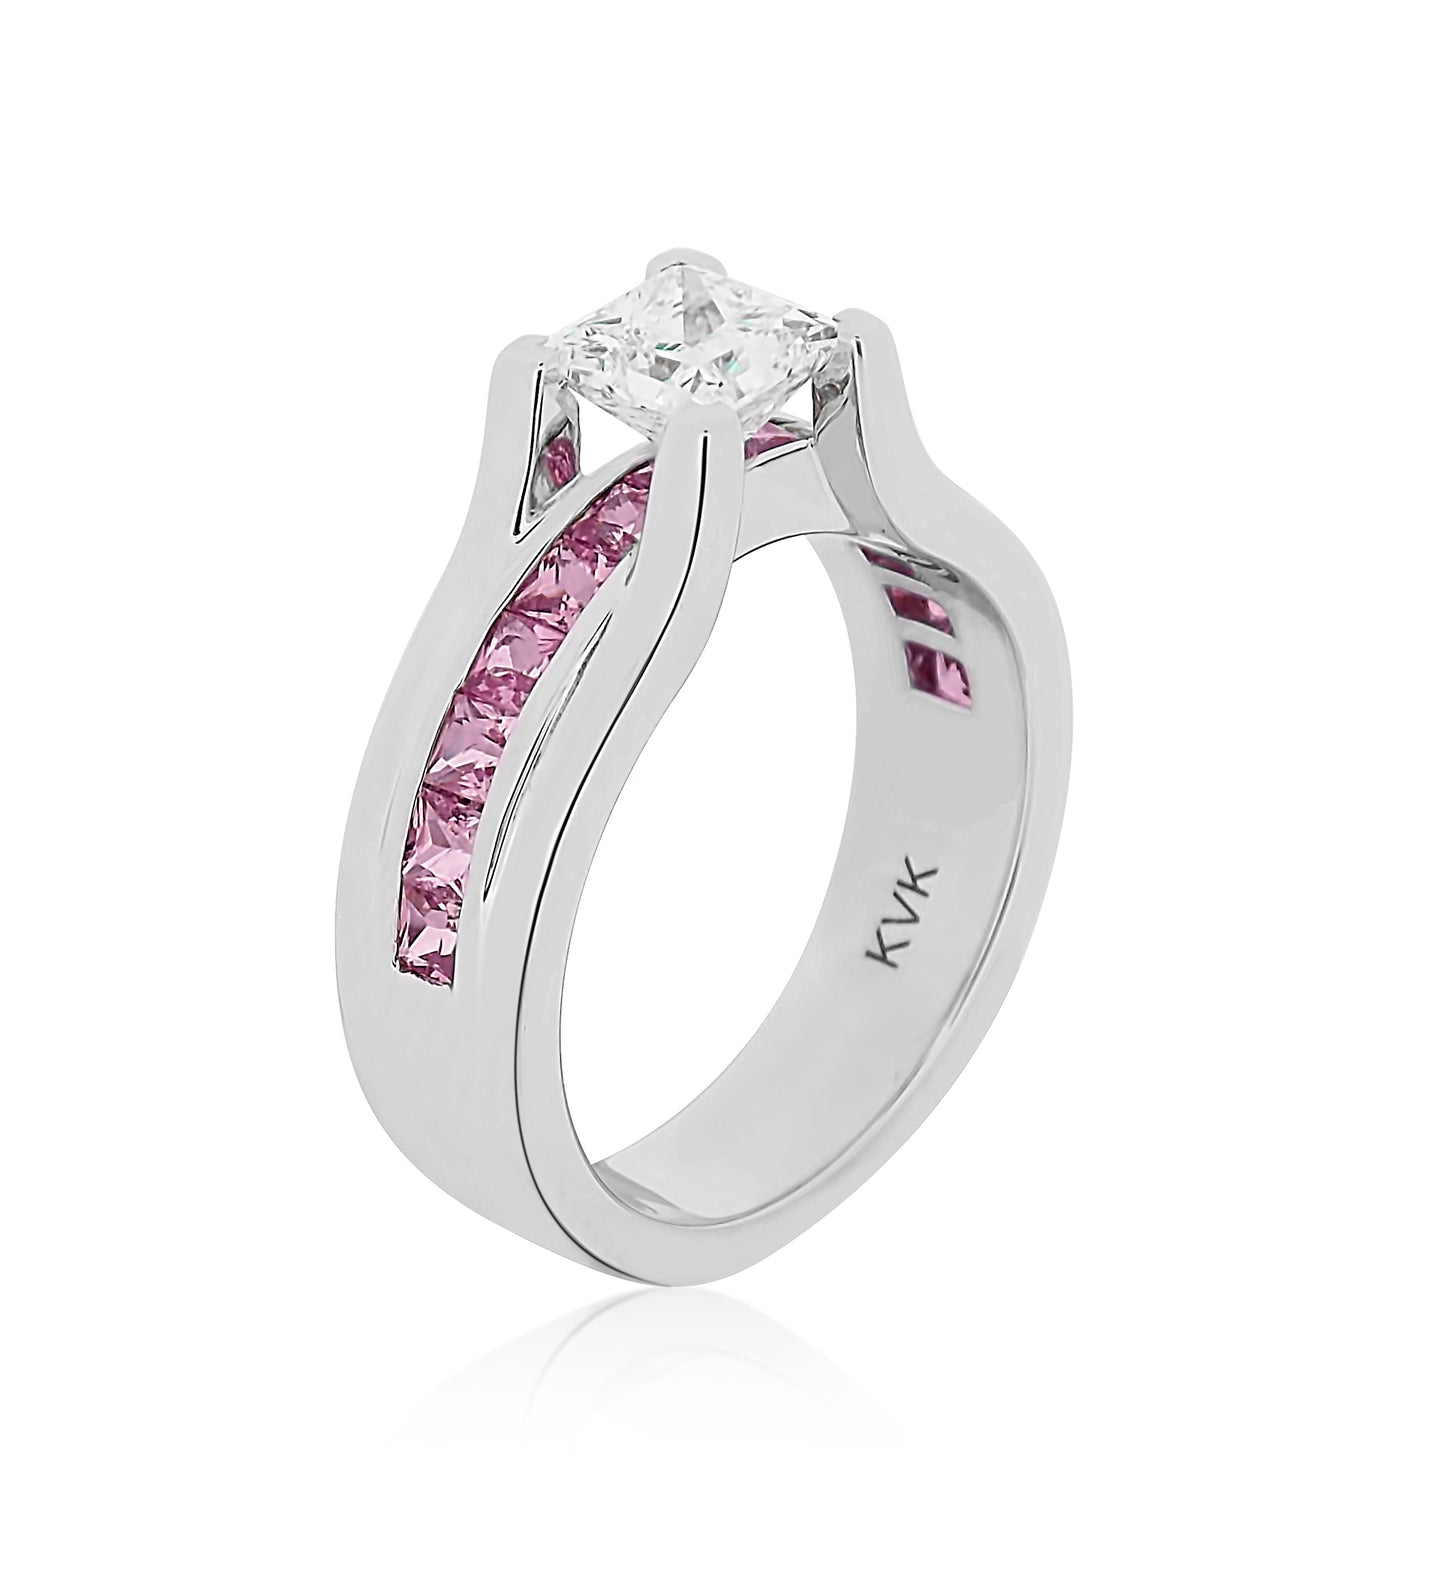 Custom Engagement Ring with Pink Sapphires